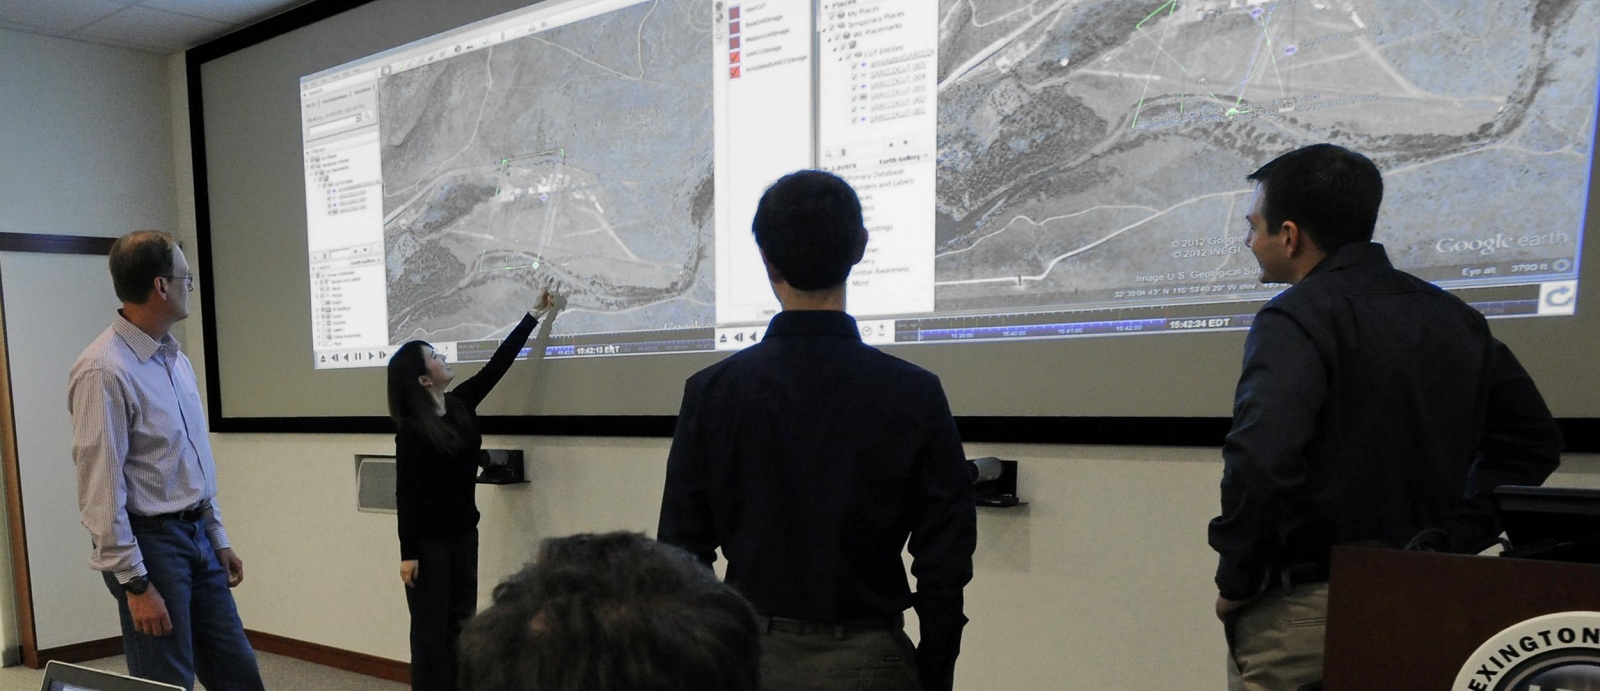 Technical staff members in the Intelligence and Decision Technologies Group review imagery of a location of interest in the maps projected in the PED Lab.